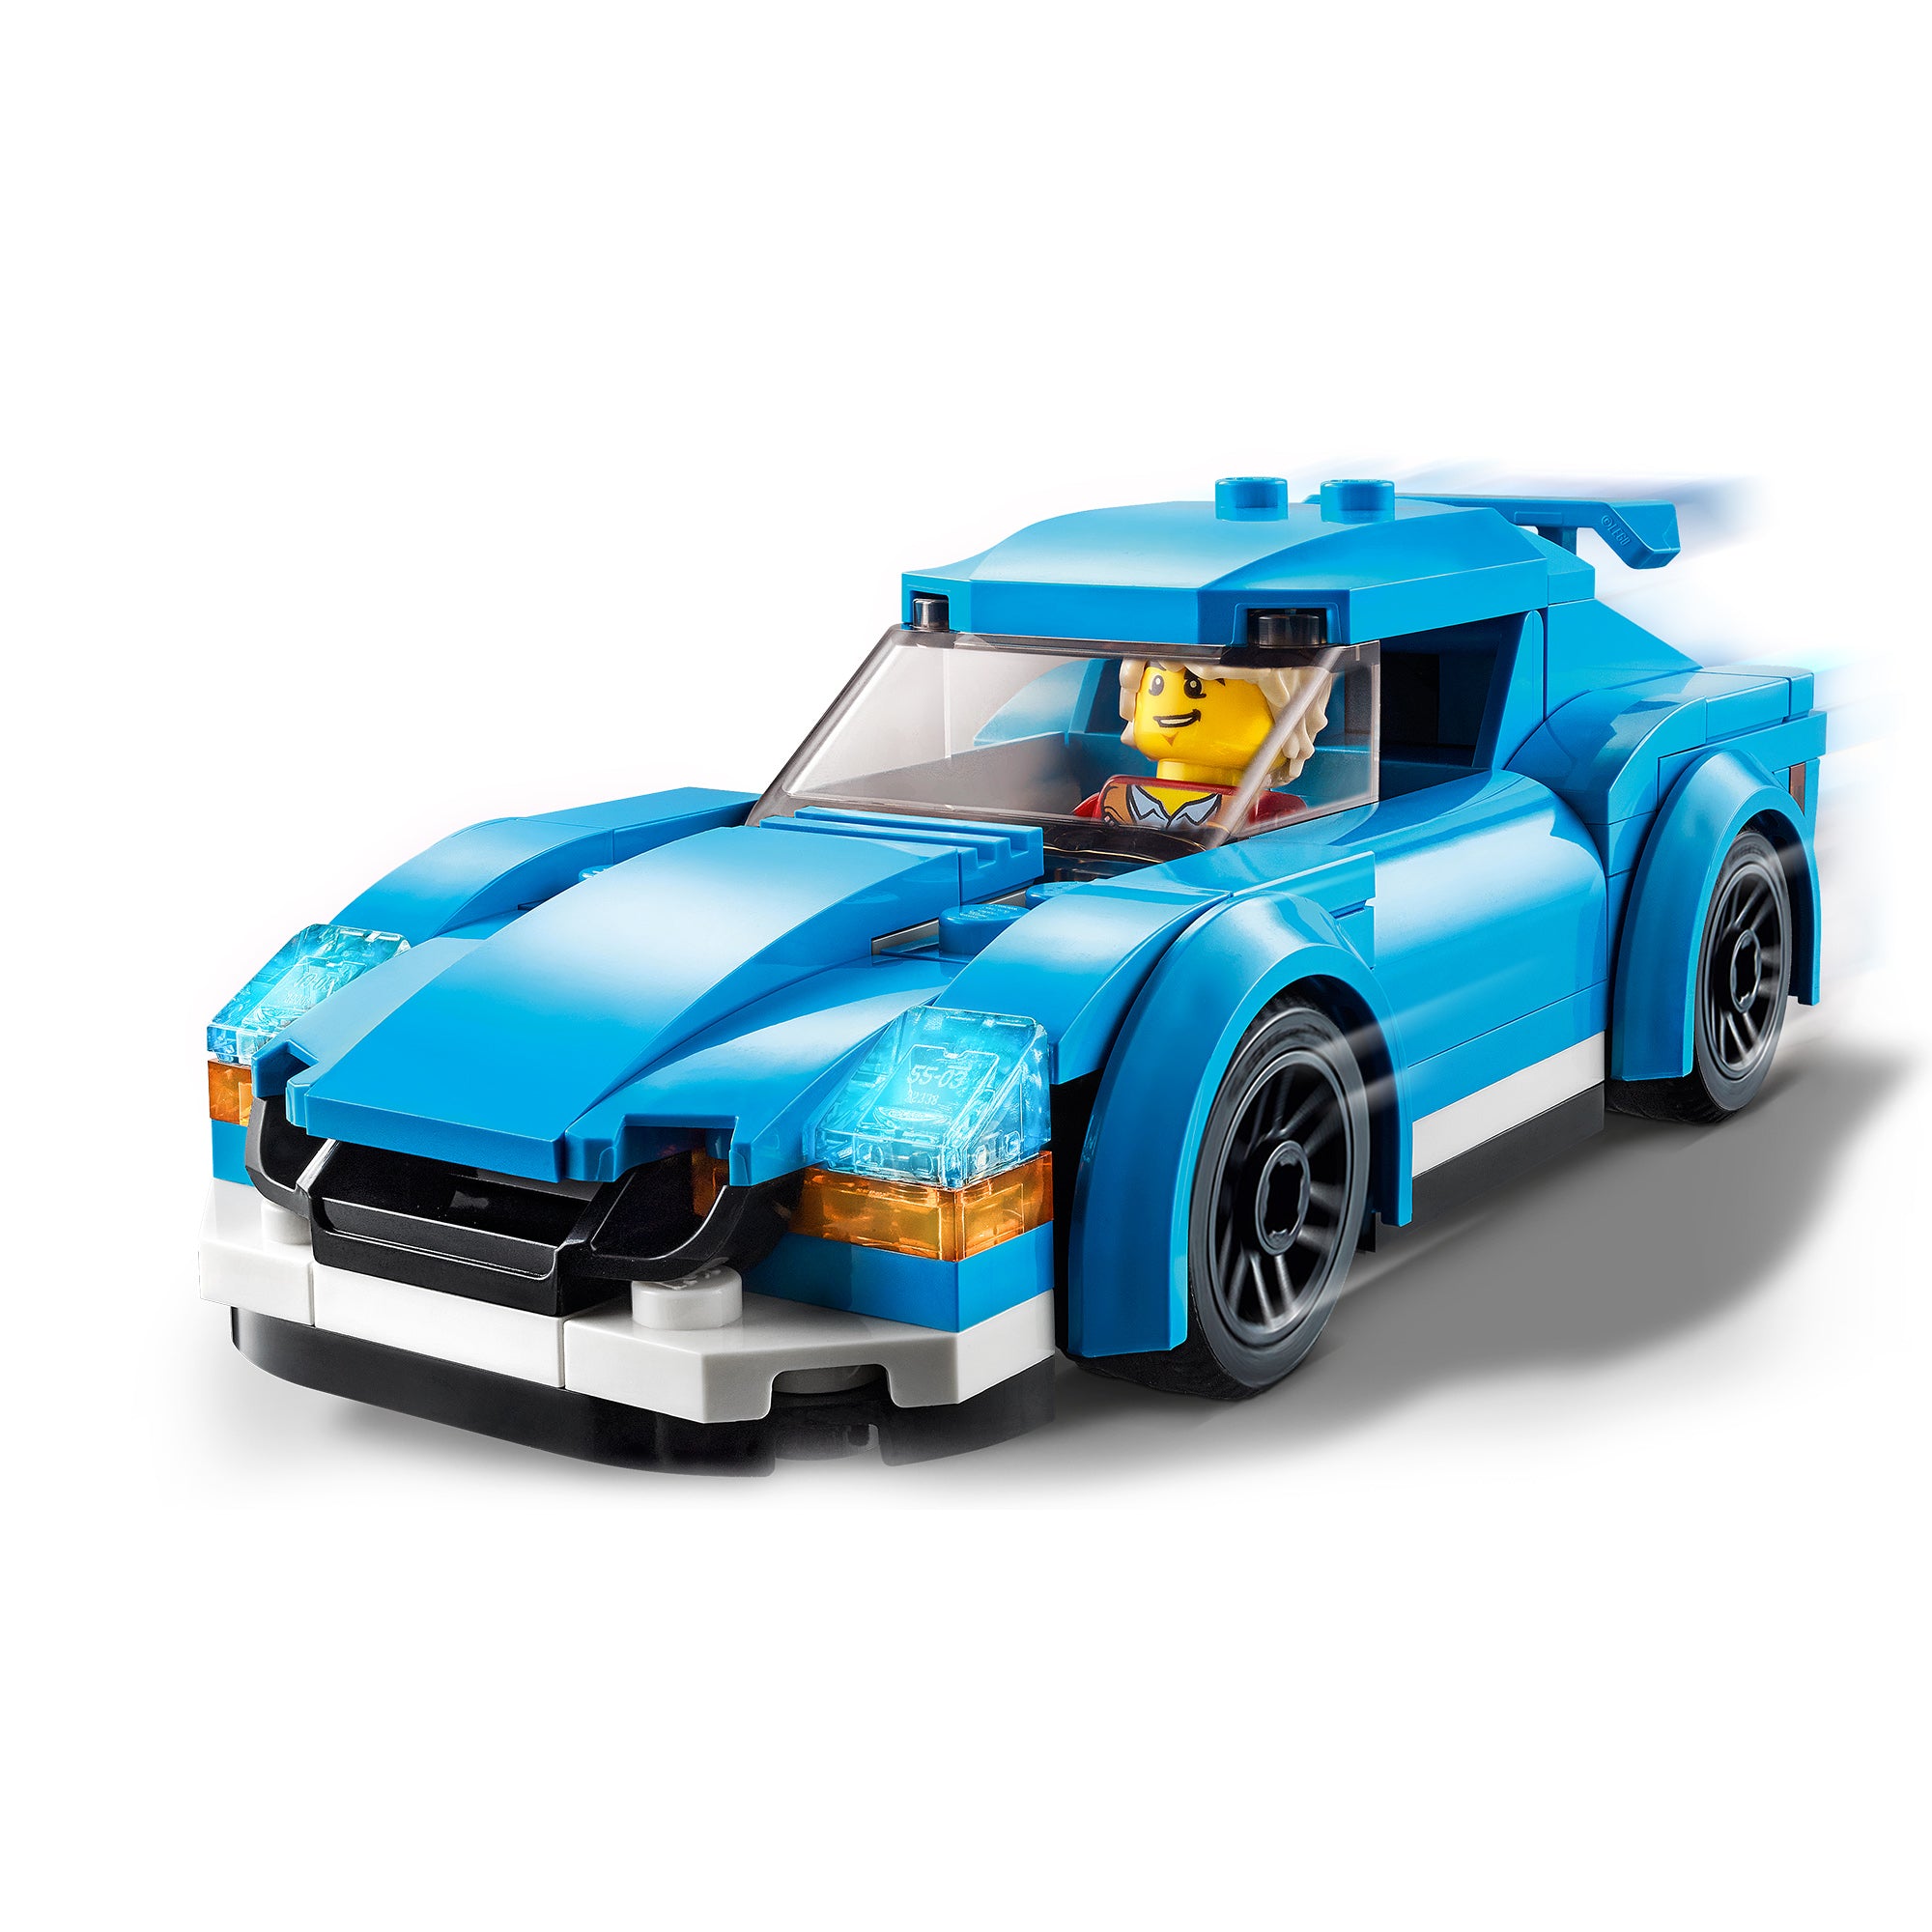 LEGO® City Great Vehicles Sports Car Toy 60285 Default Title